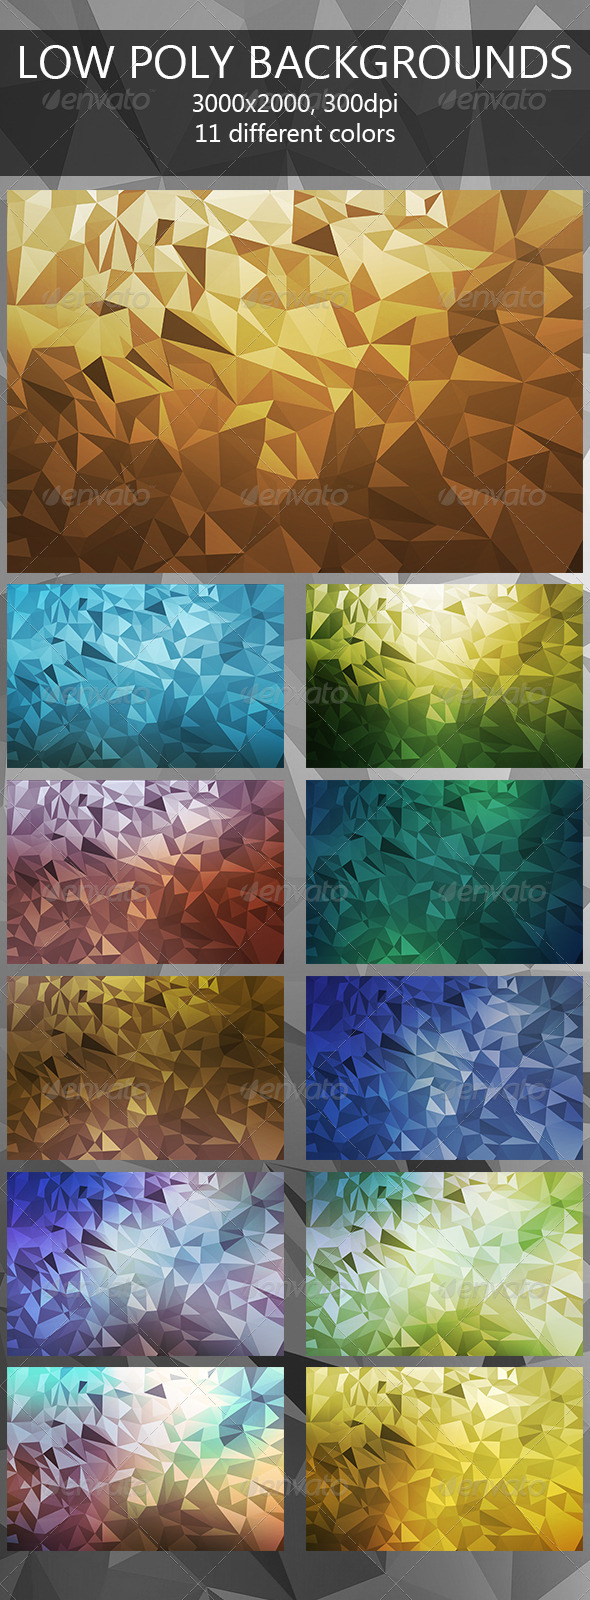 GraphicRiver Low Poly Backgrounds 7720807